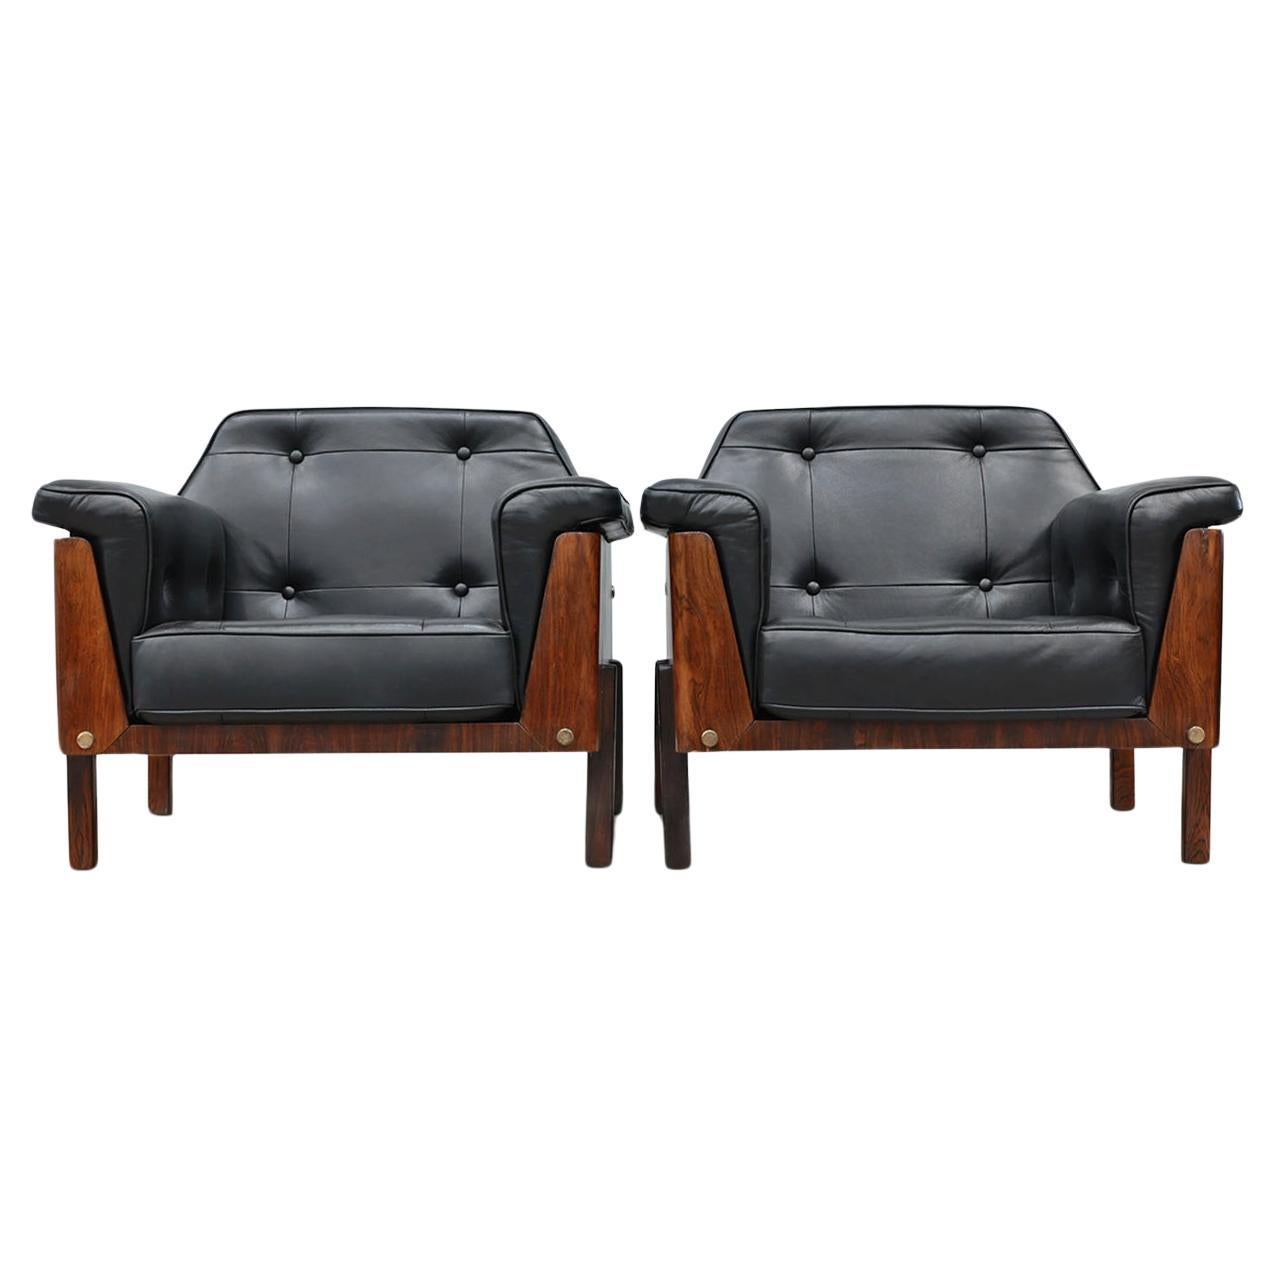 Mid-Century Modern Armchairs in Rosewood & Black Leather by Bertomeu, Brazil